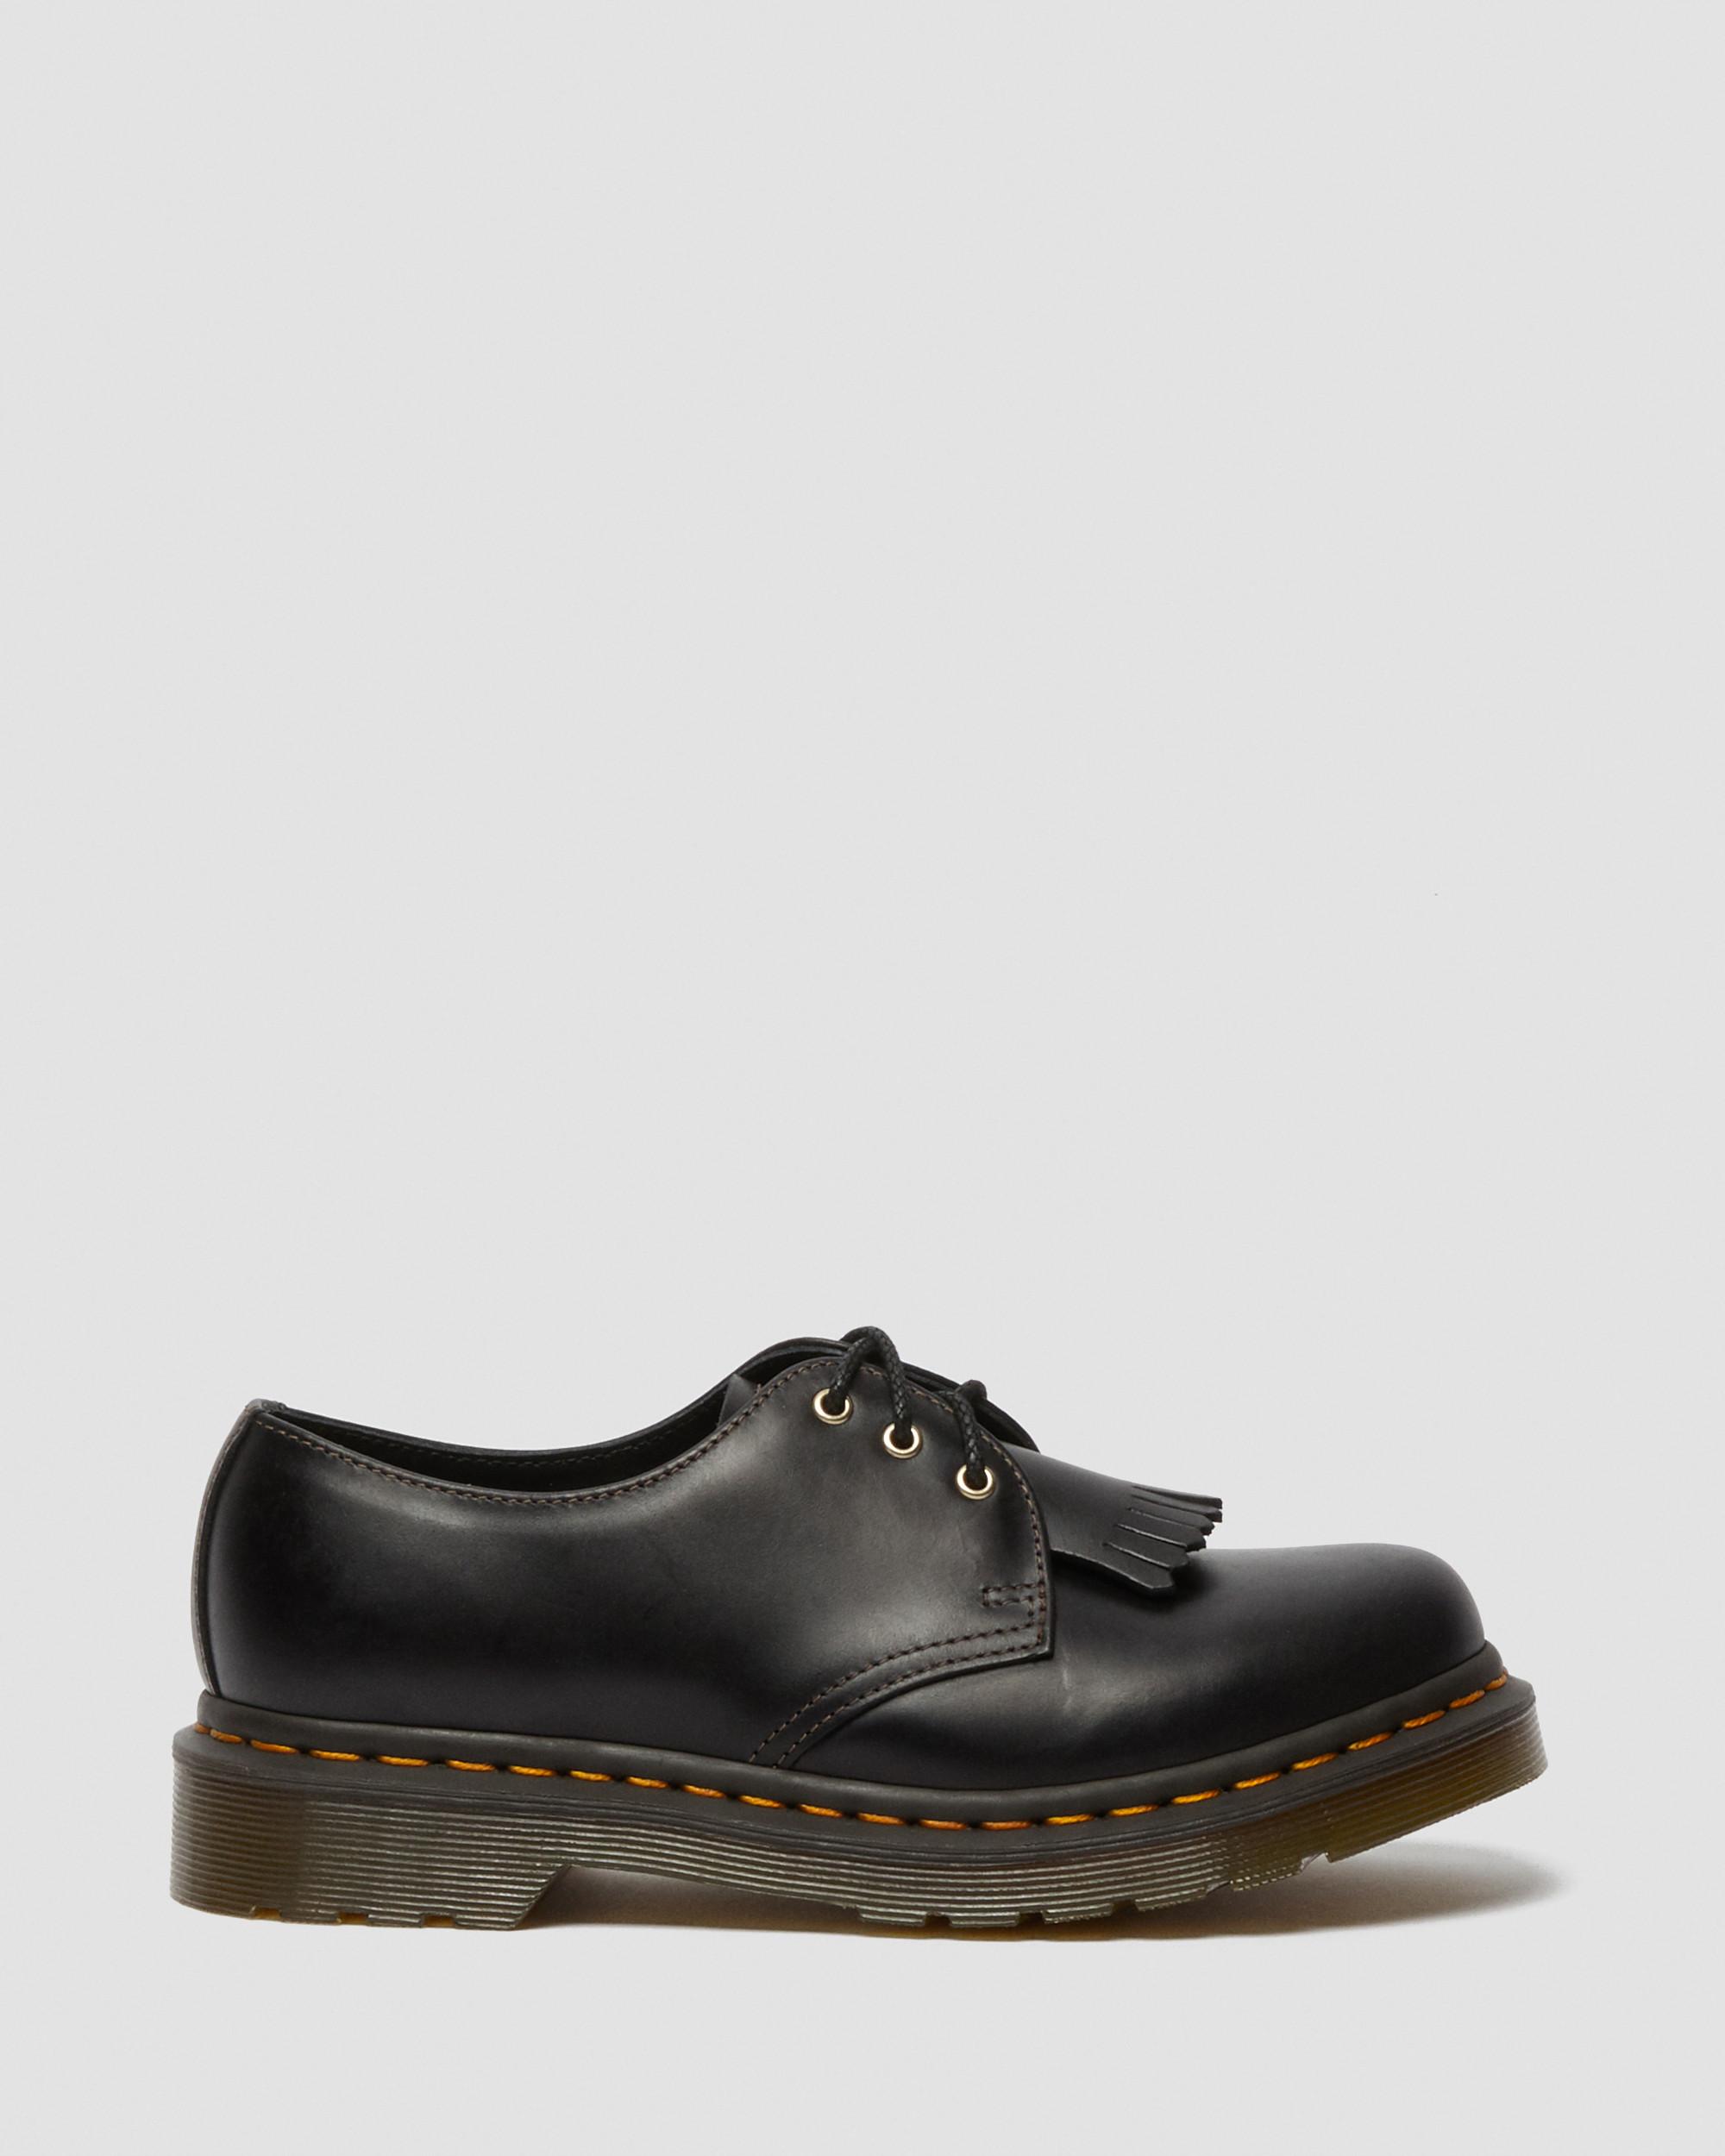 DR MARTENS 1461 Women's Abruzzo Leather Oxford Shoes